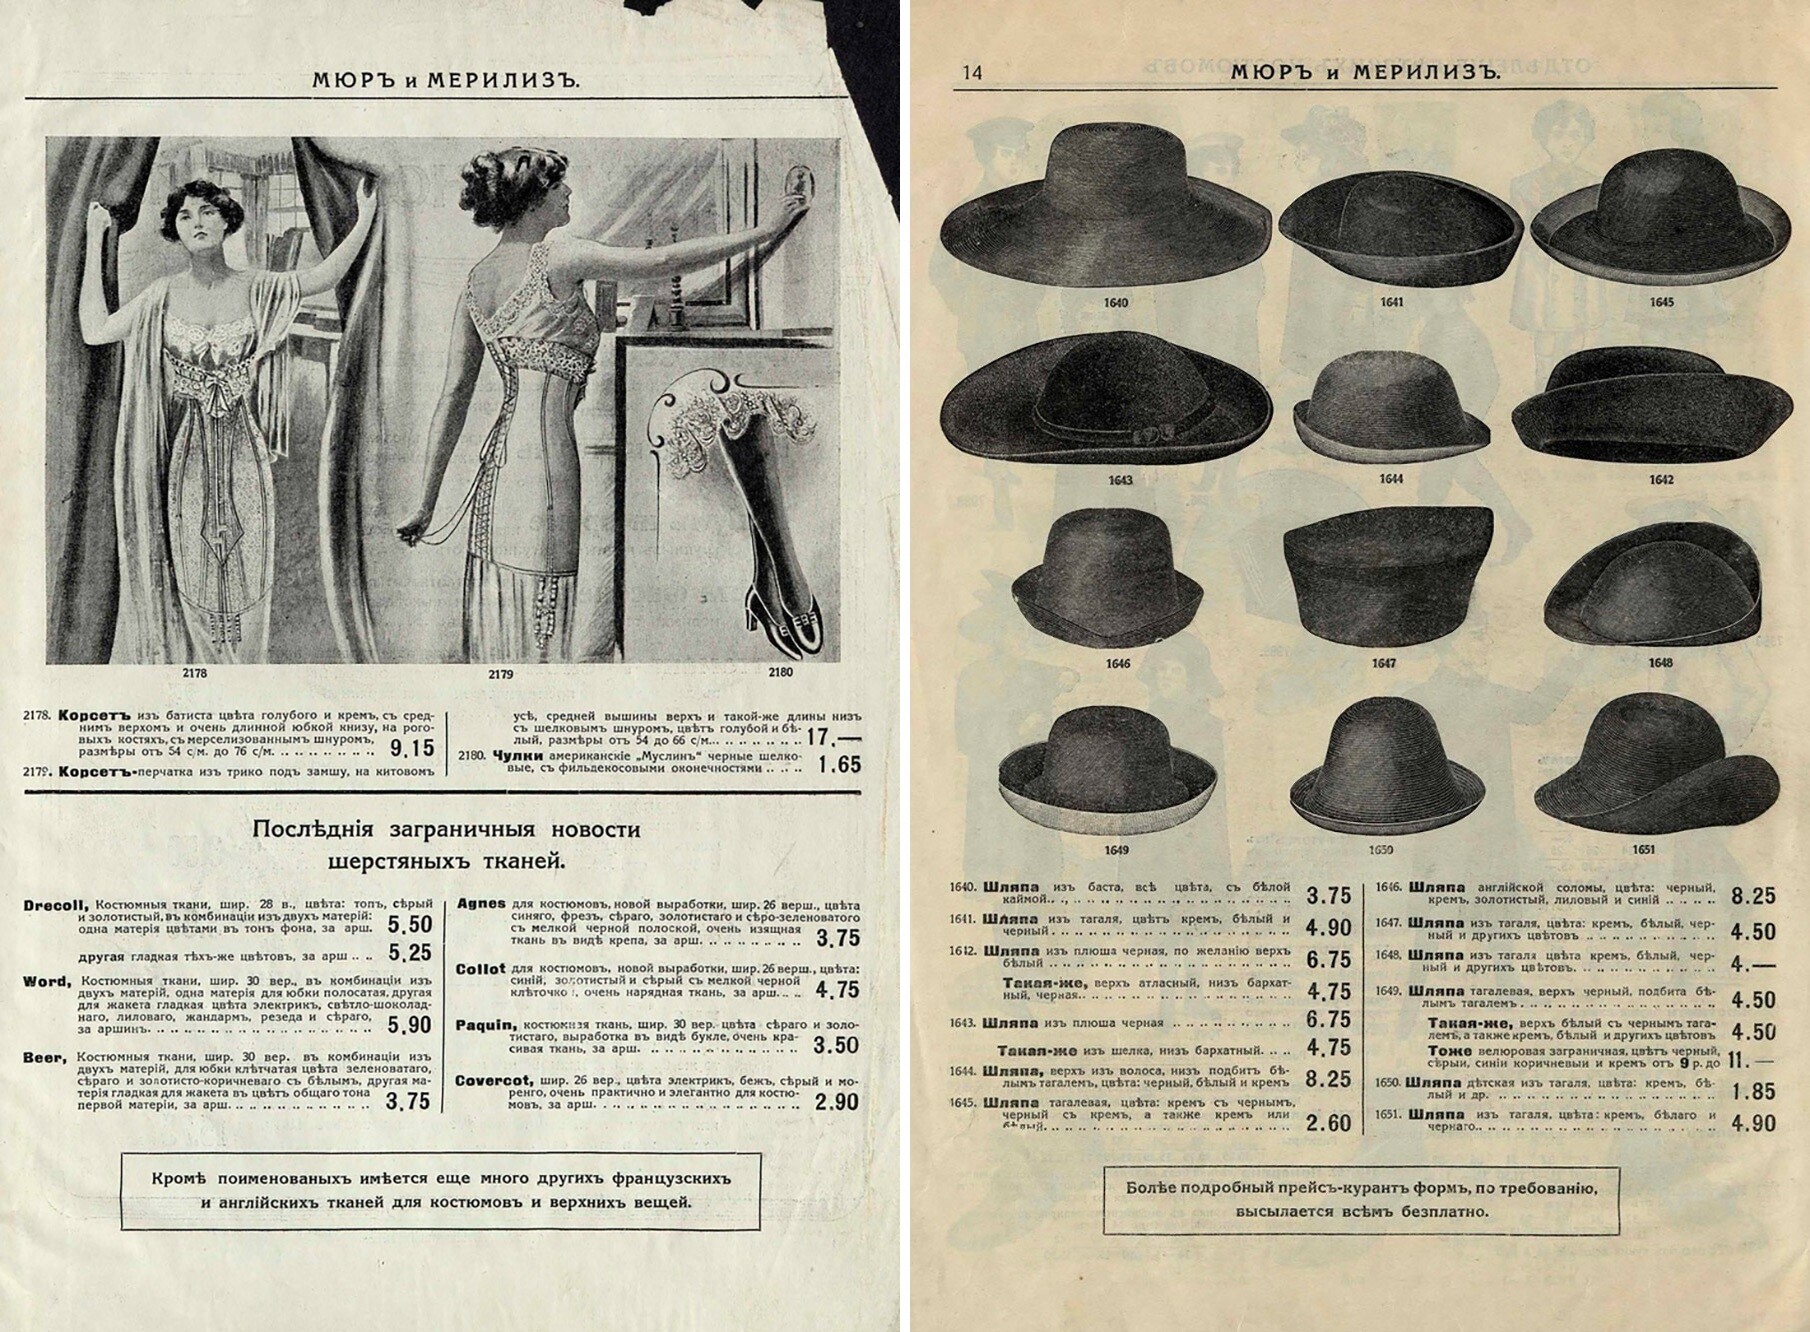 Pages from the ‘Muir & Mirrielees’ catalog, 1913